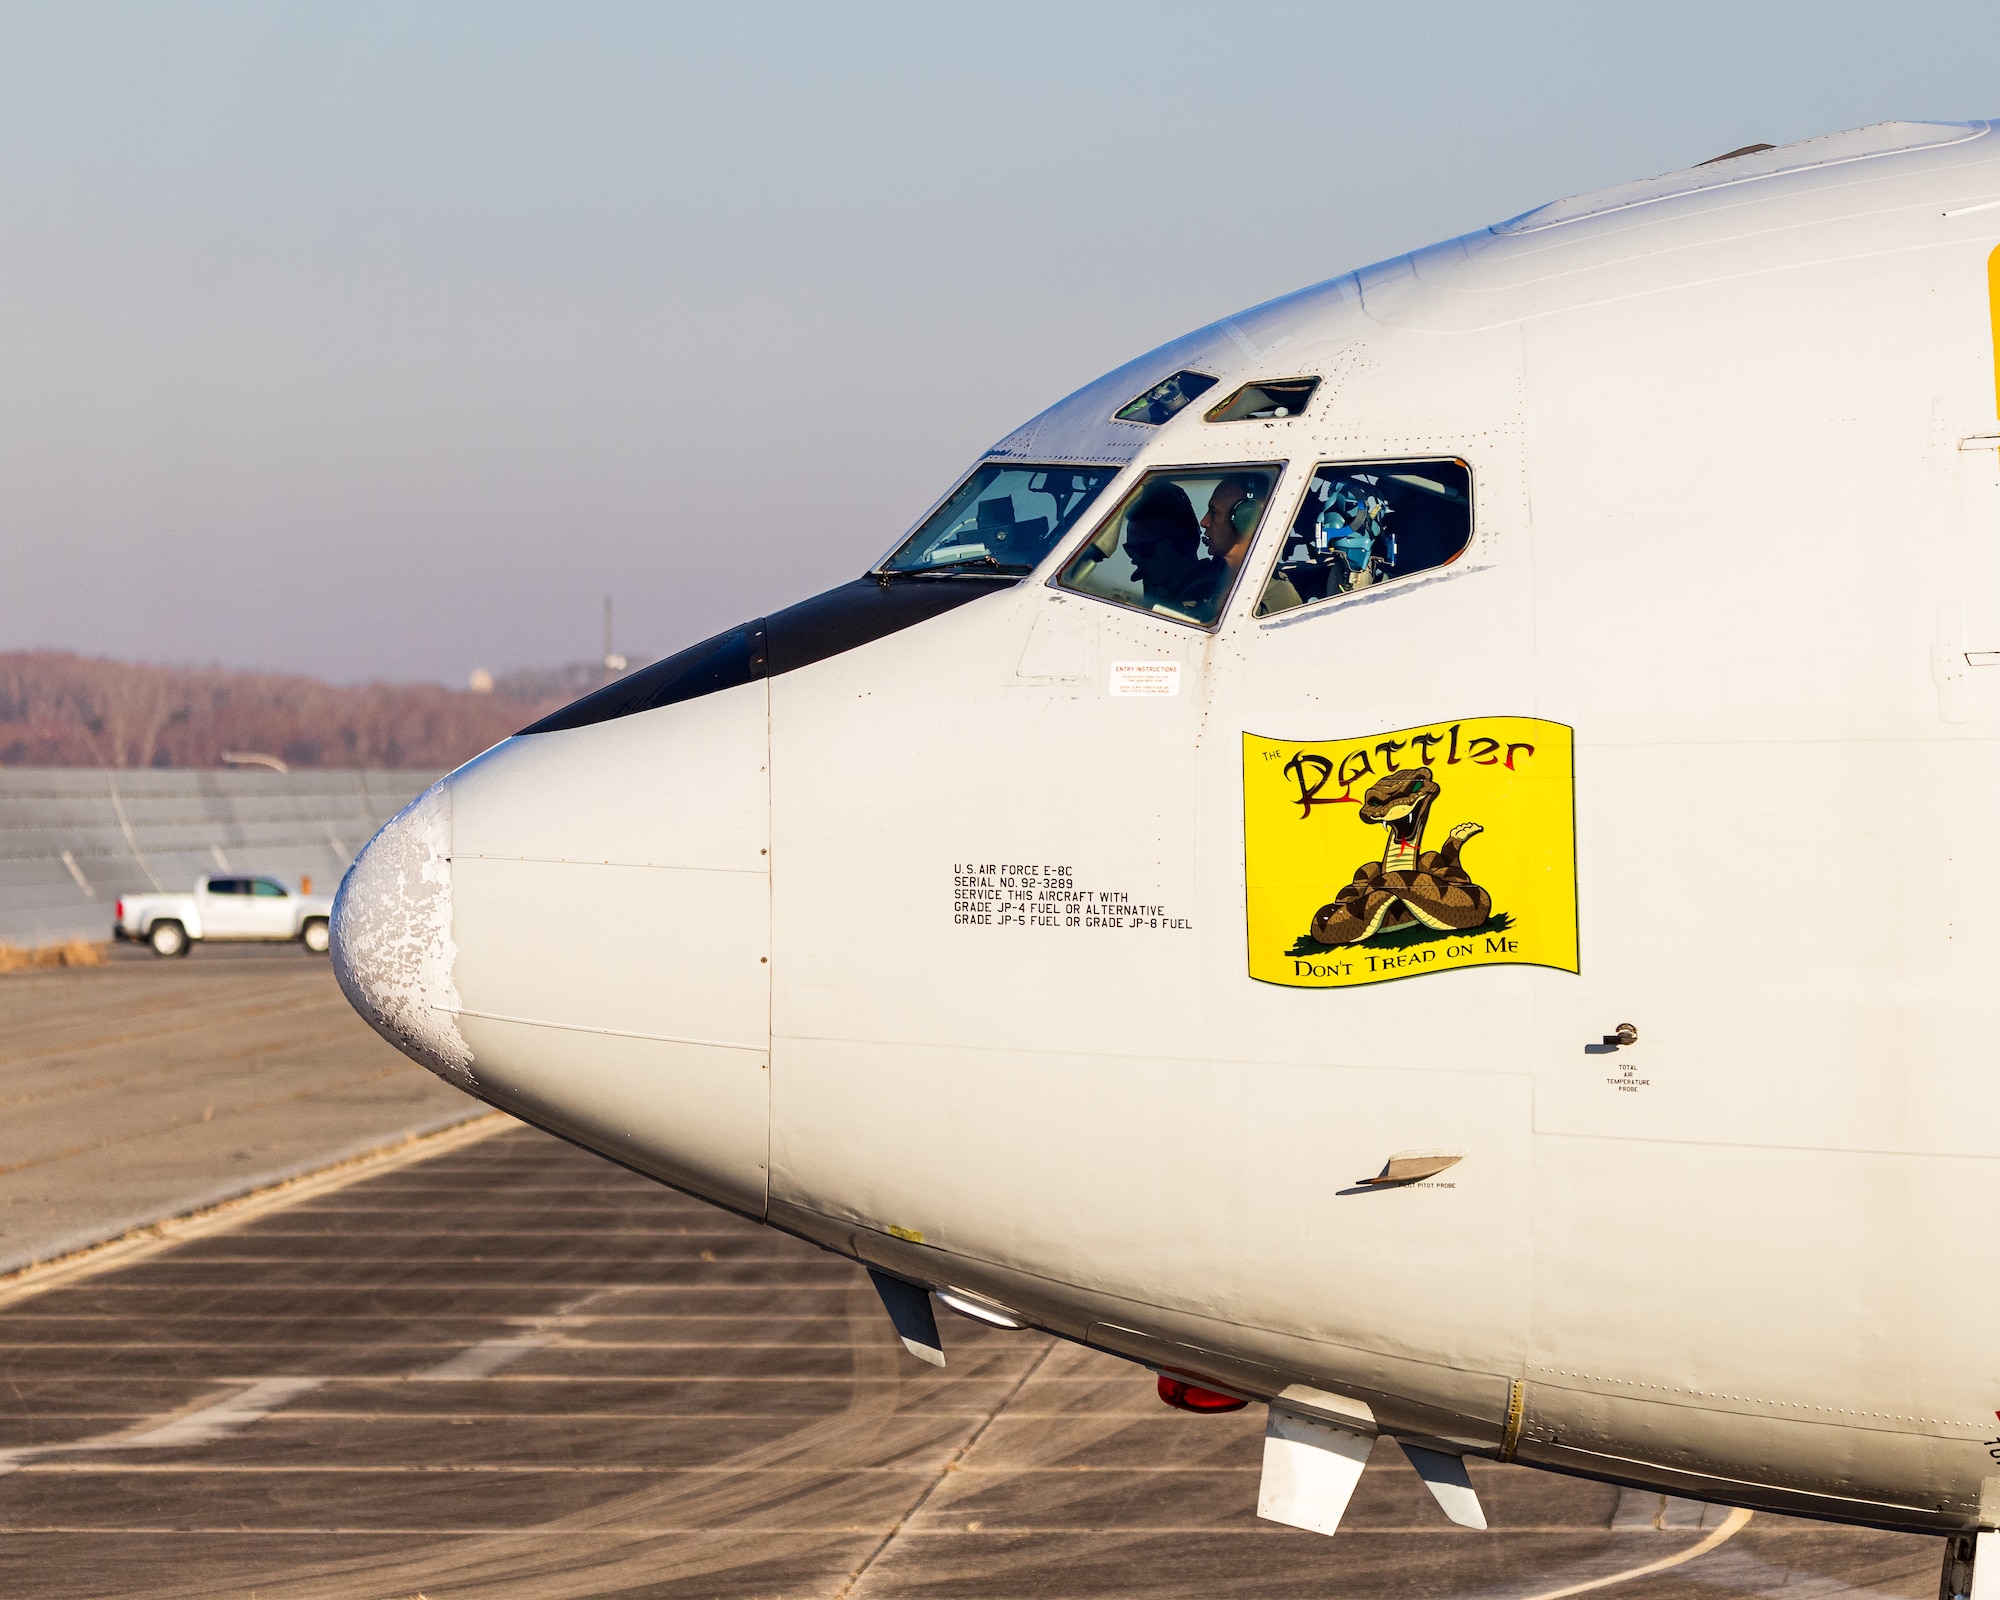 An E-8C Joint STARS aircraft taxis prior to its final departure at Robins Air Force Base, Georgia, Feb. 11, 2022. The primary mission of Joint STARS is to provide theater ground and air commanders with ground surveillance to support attack operations and targeting that contributes to the delay, disruption and destruction of enemy forces. (U.S. Air National Guard photo by Tech. Sgt. Jeff Rice)